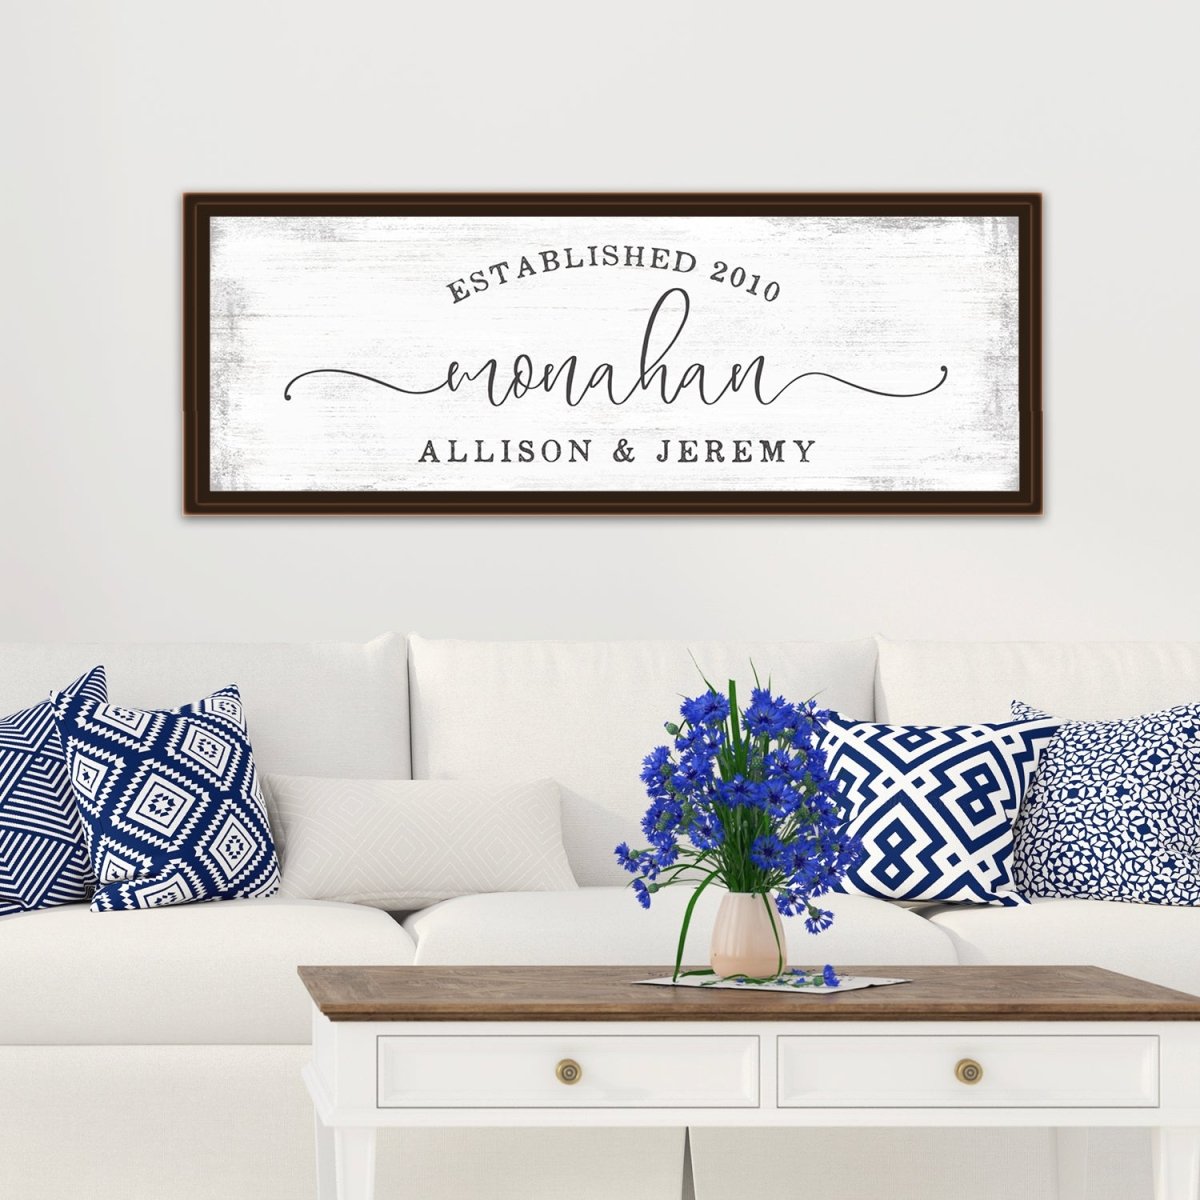 Newlywed Established Sign in Family Room - Pretty Perfect Studio